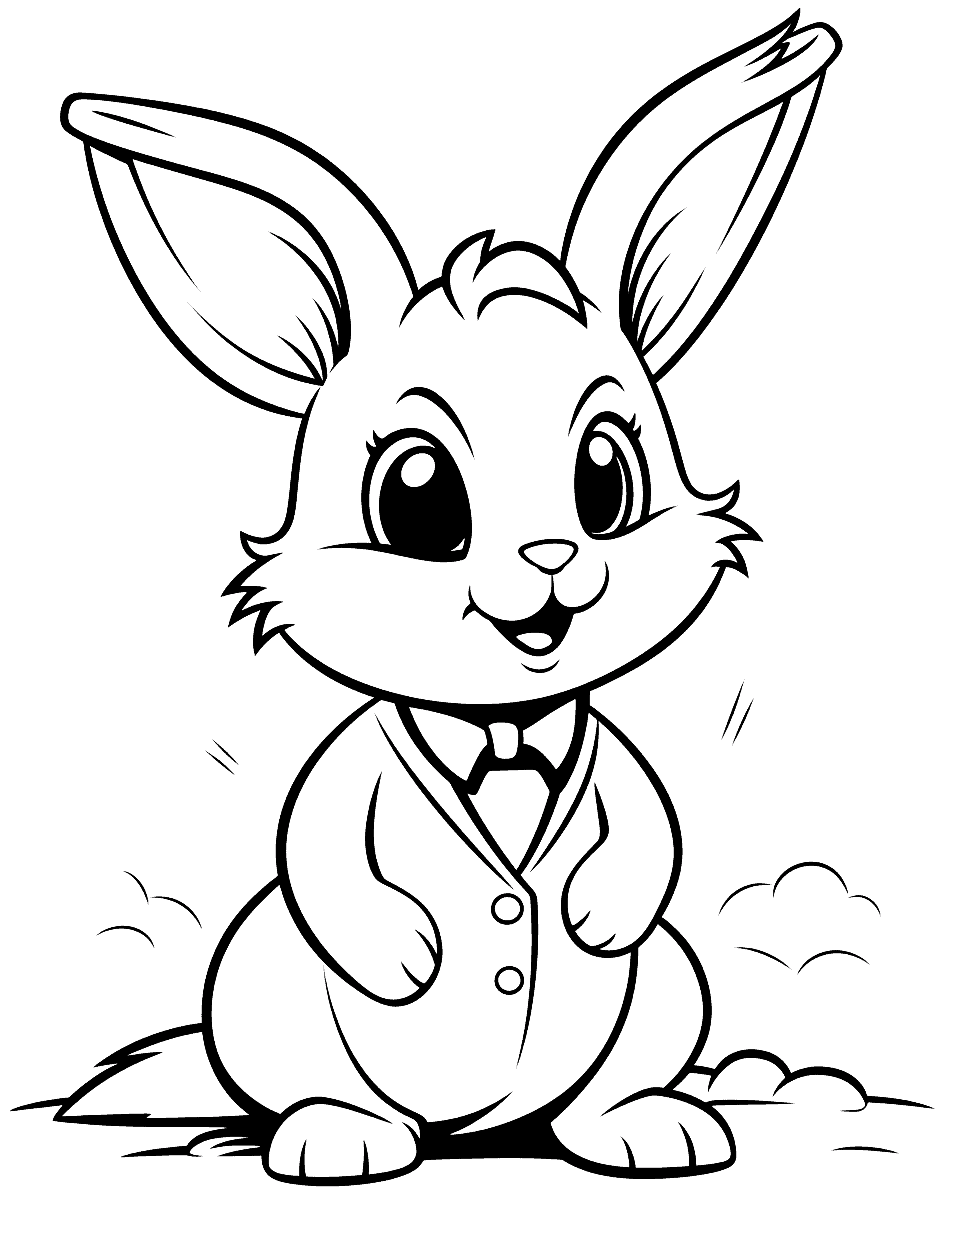 Dapper Bunny Boy with Bowtie Coloring Page - A male bunny looking dapper in a suit and bowtie, ready for a fancy event.